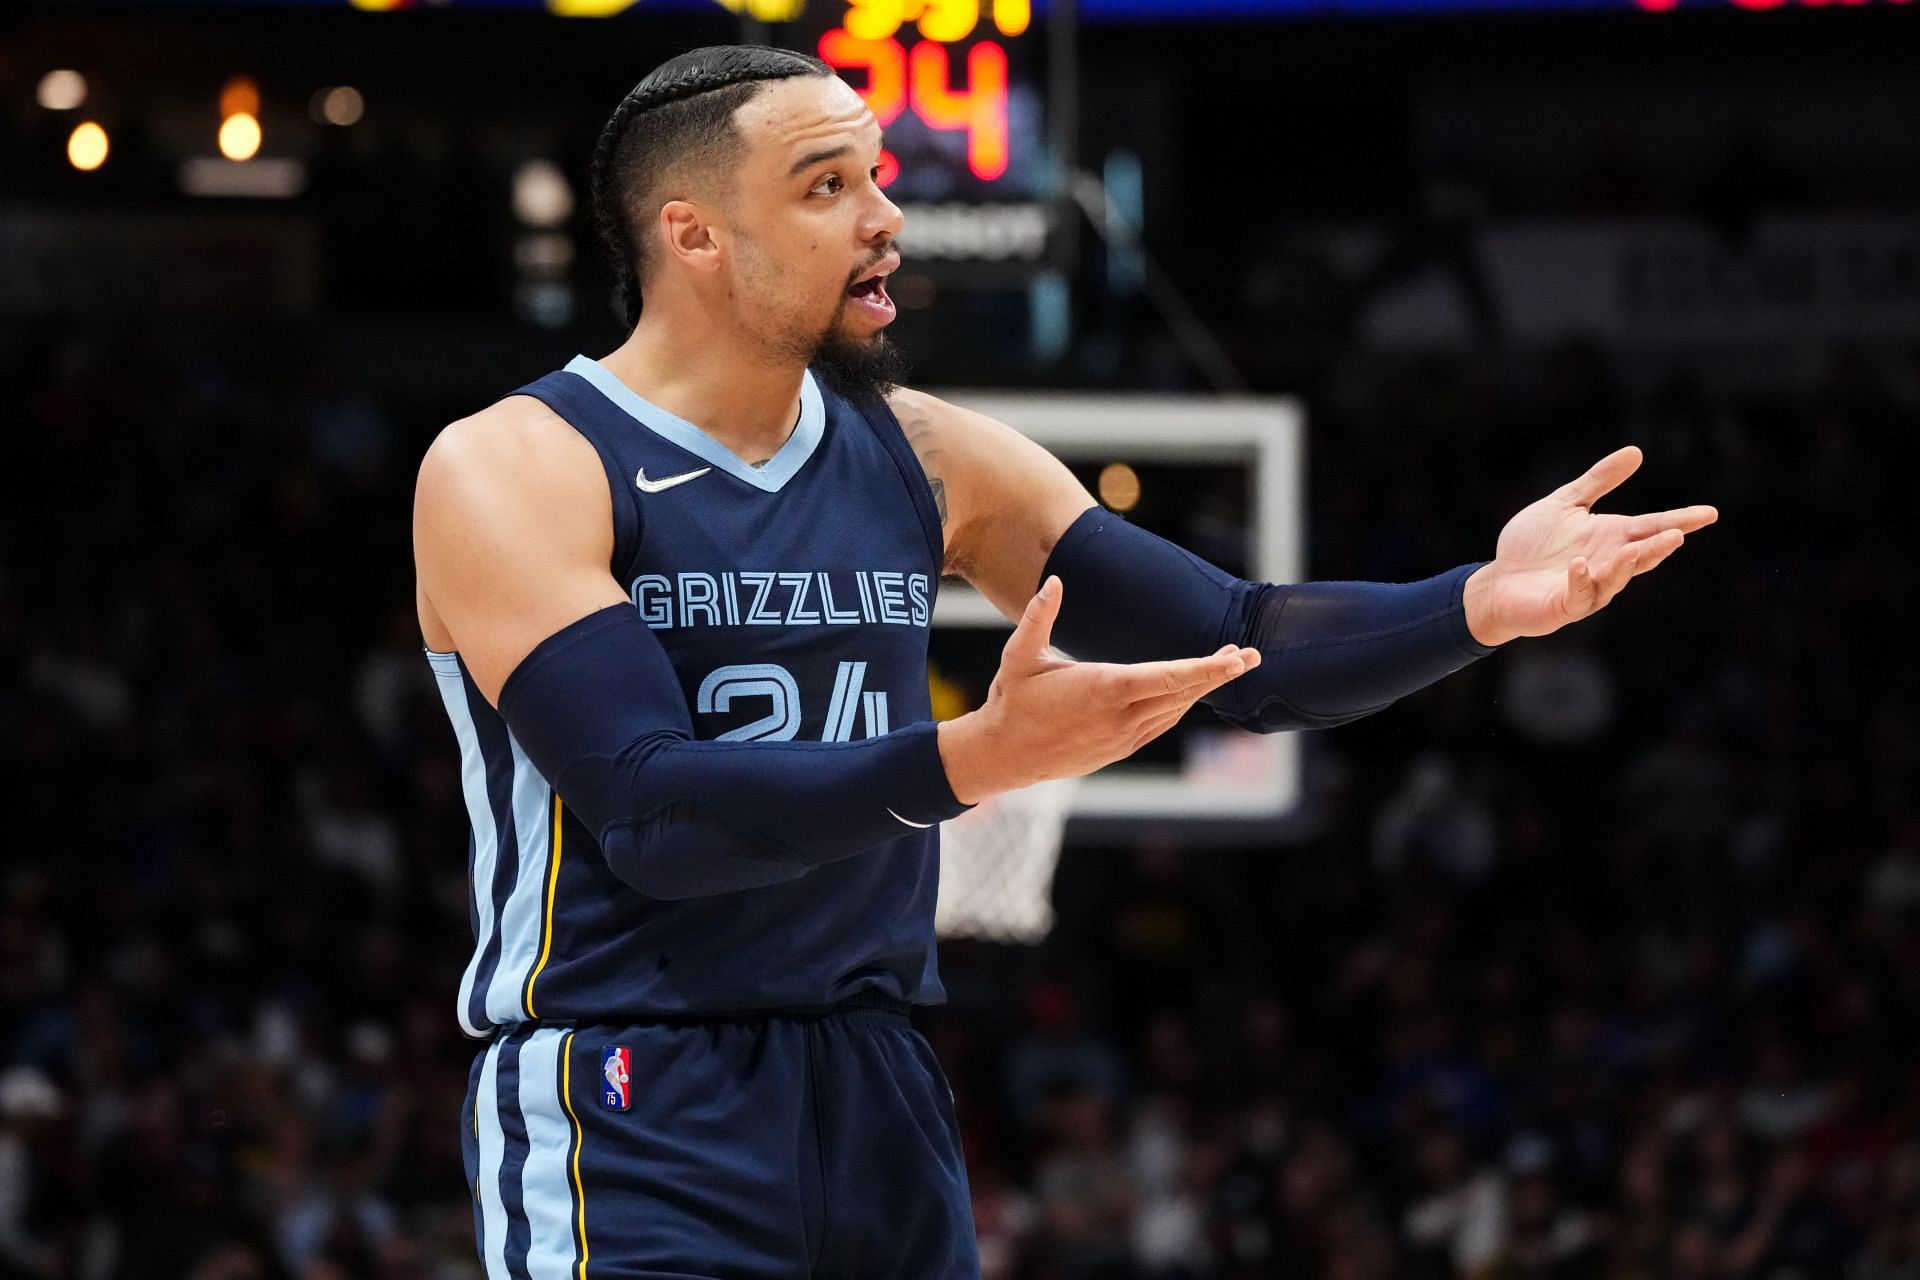 Dillon Brooks of the Memphis Grizzlies was suspended by the league for Game 3 against the Golden State Warriors